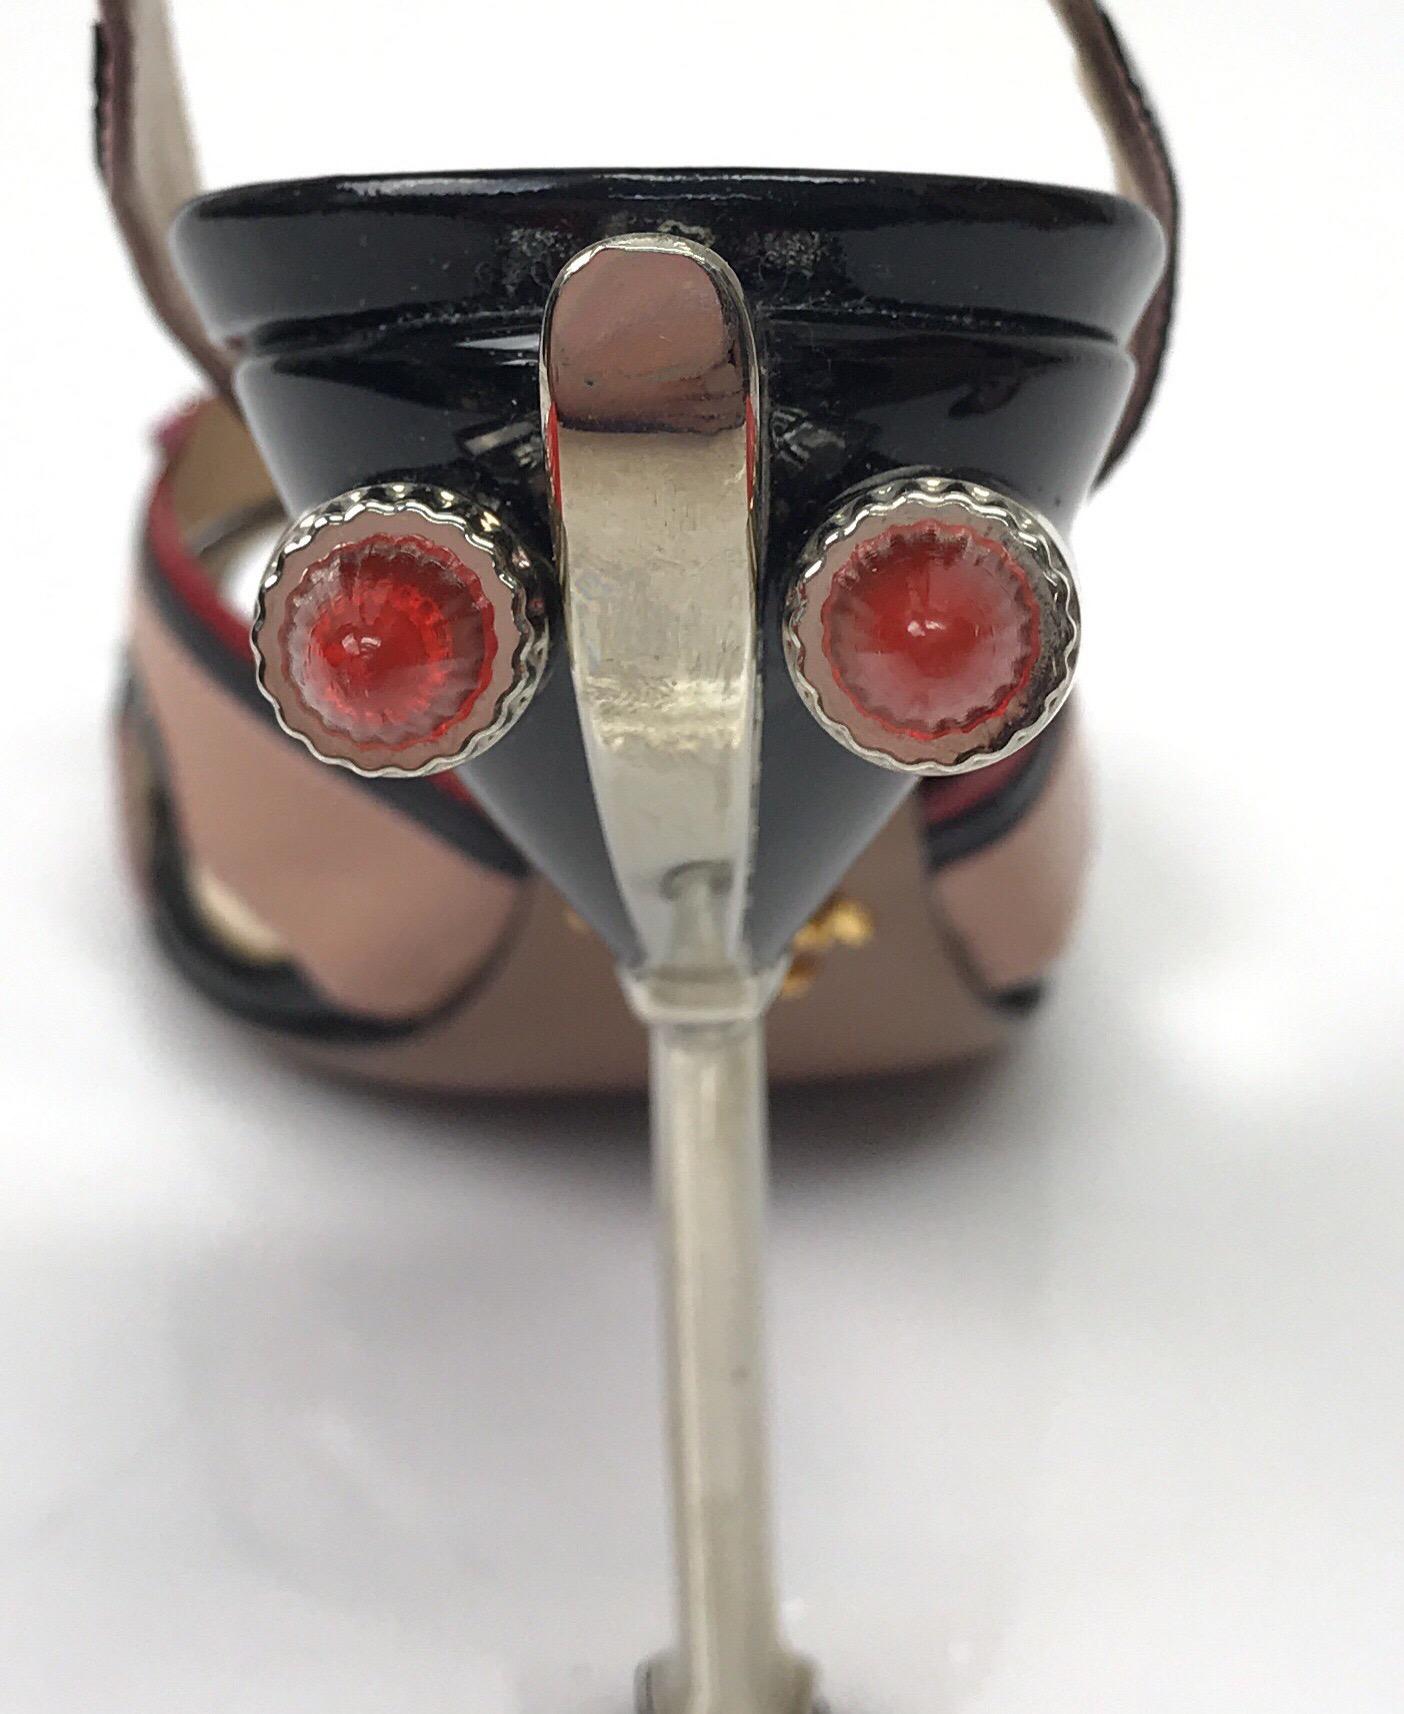 PRADA Black & Red Couture Jeweled Taillight Heels-37.5 1